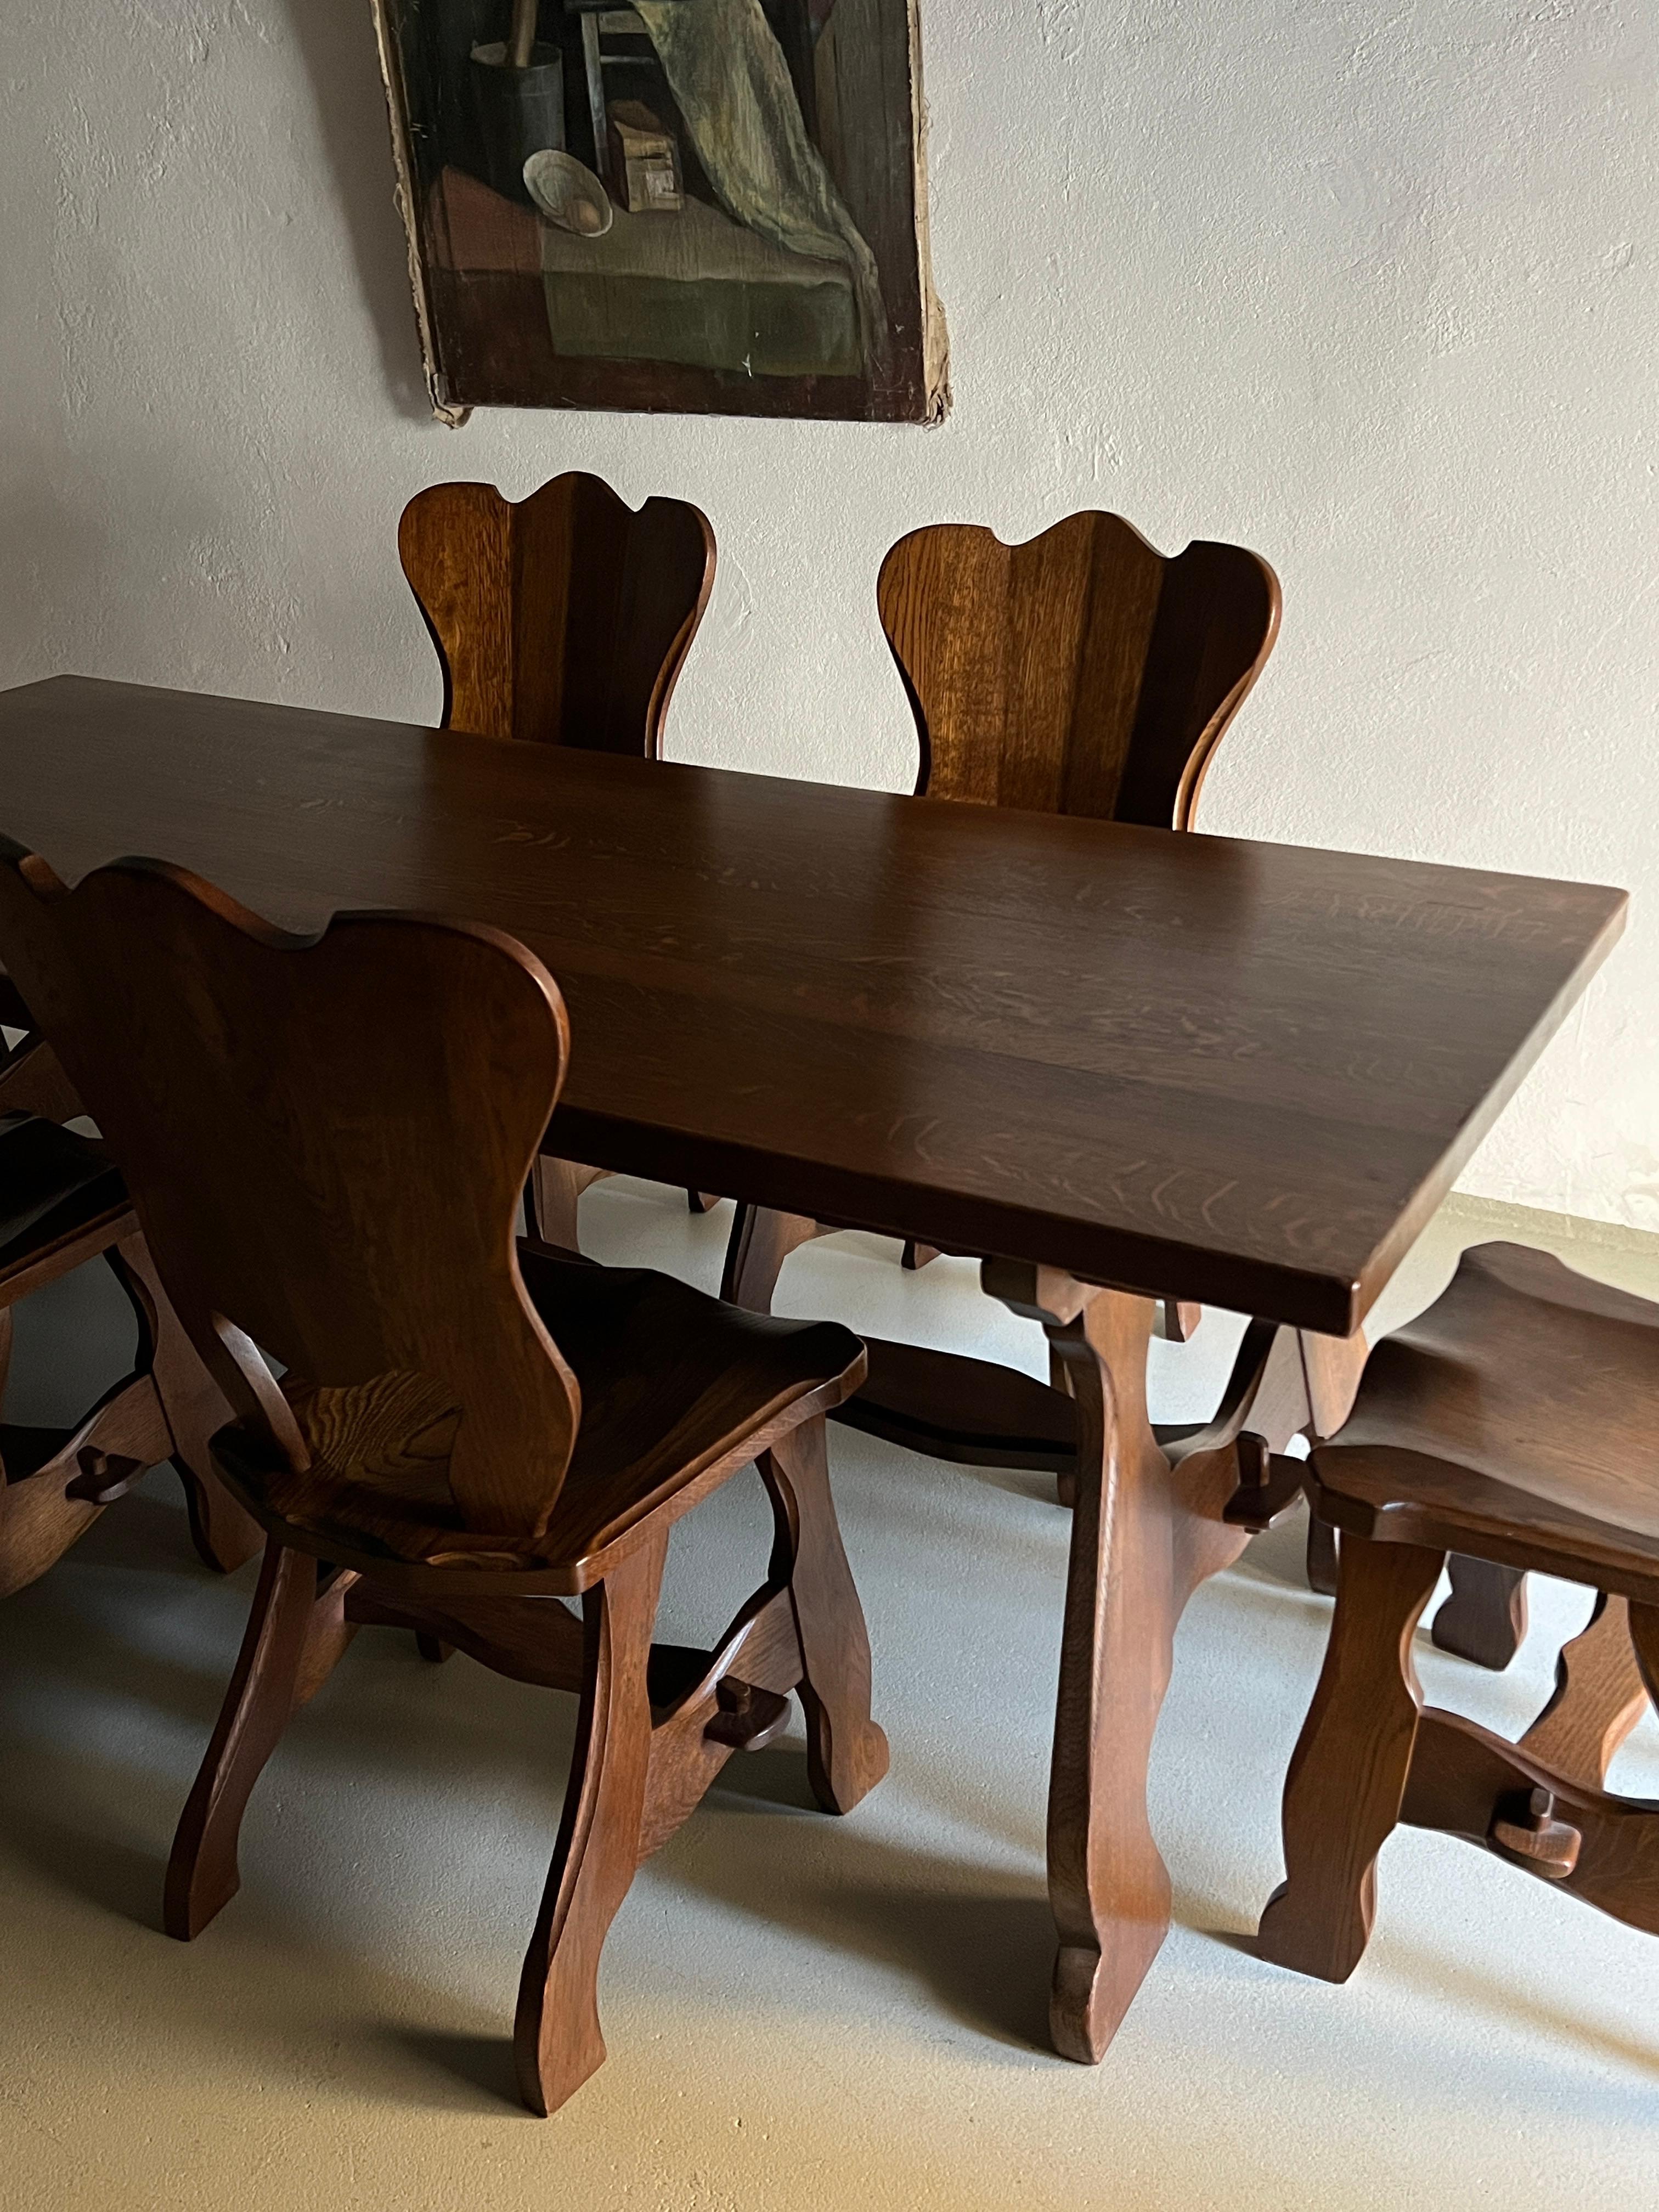 Brutalist Oak Dining Table Set with Six Chairs, Netherlands, 1970s For Sale 7